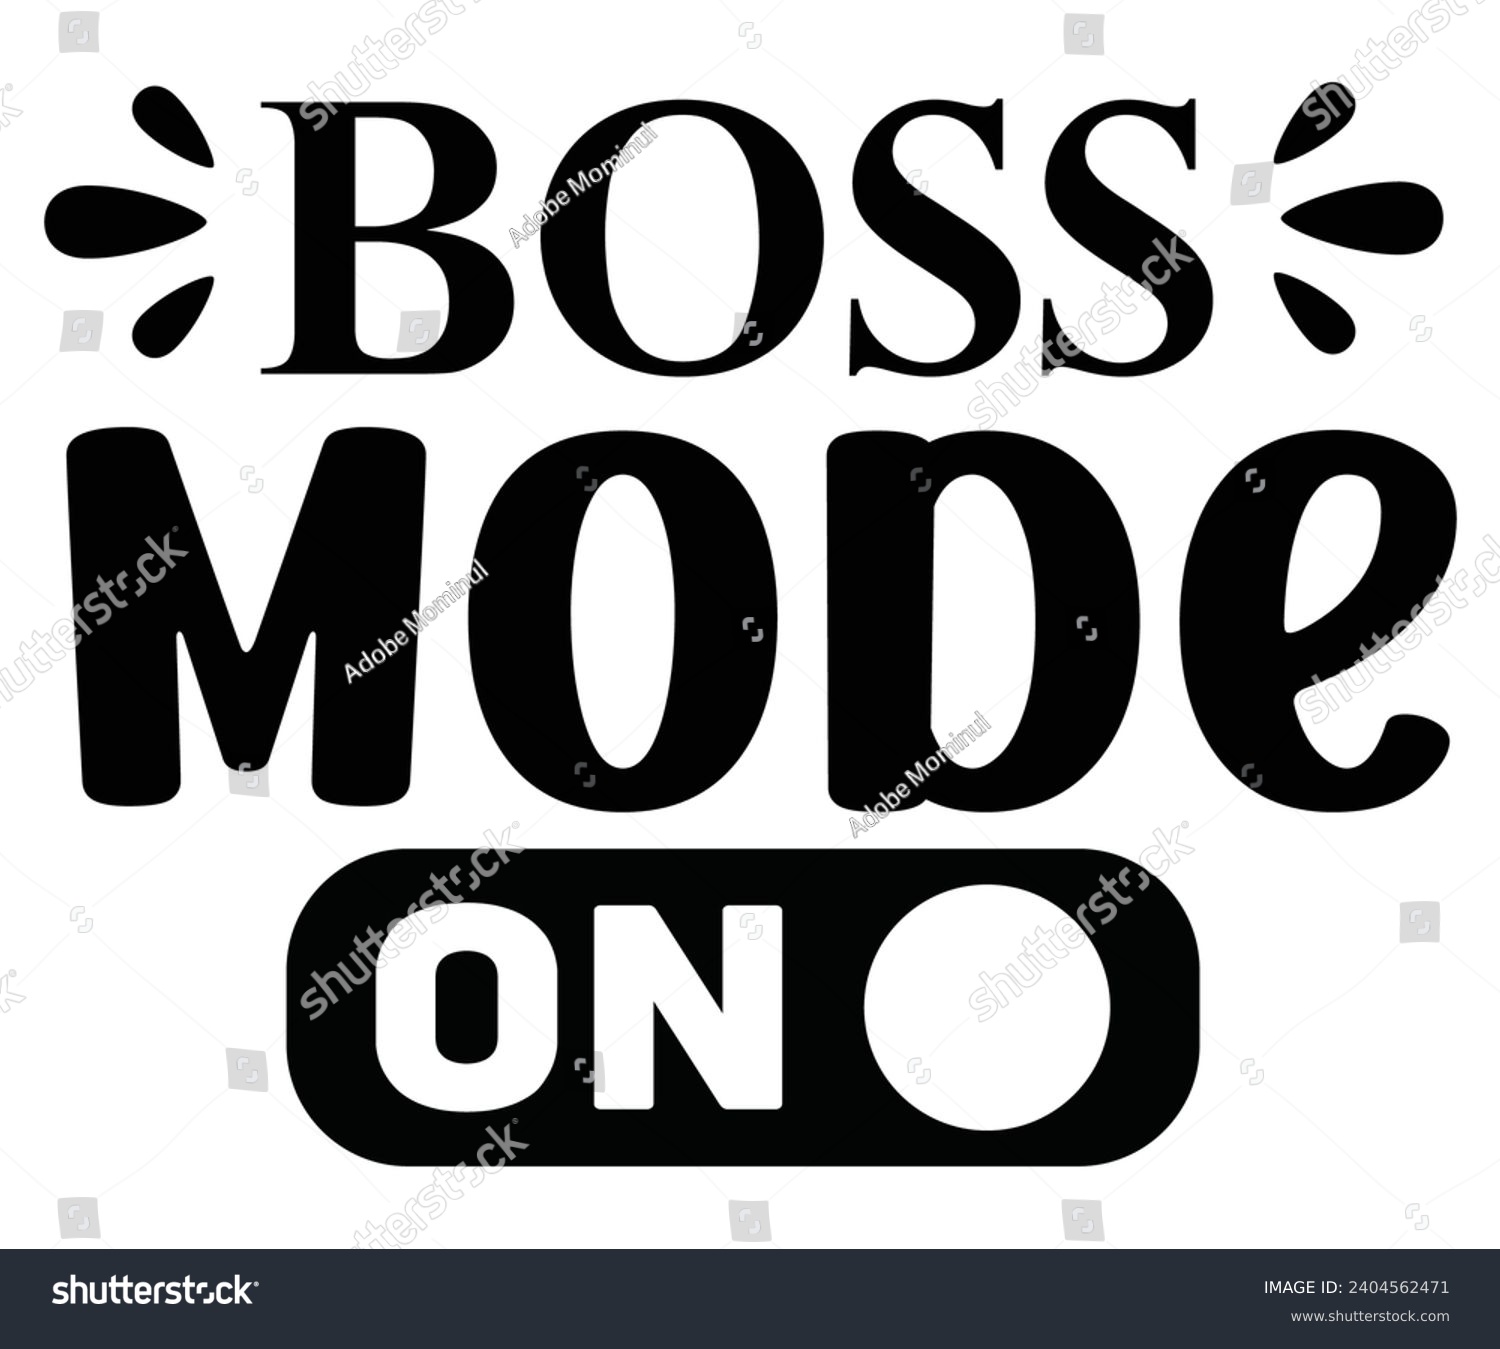 SVG of Boss Mode On Svg,Happy Boss Day svg,Boss Saying Quotes,Boss Day T-shirt,Gift for Boss,Great Jobs,Happy Bosses Day t-shirt,Girl Boss Shirt,Motivational Boss,Cut File,Circut And Silhouette,Commercial  svg